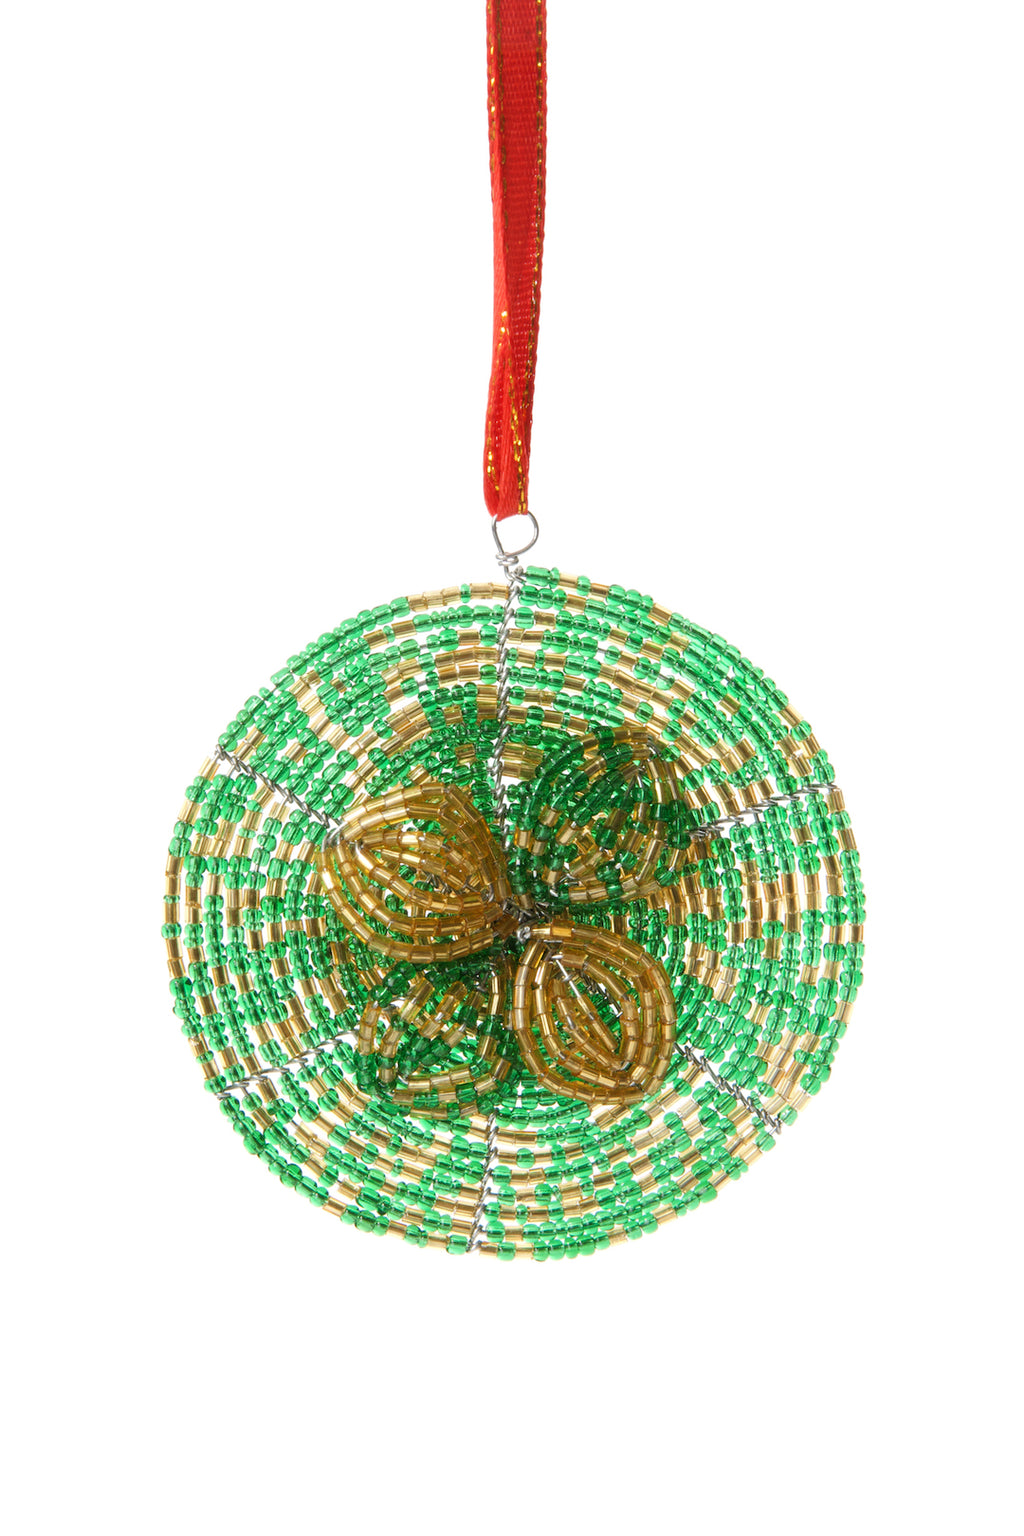 Four Heart-Shaped Beaded Ornaments in Green from India - Green Hearts